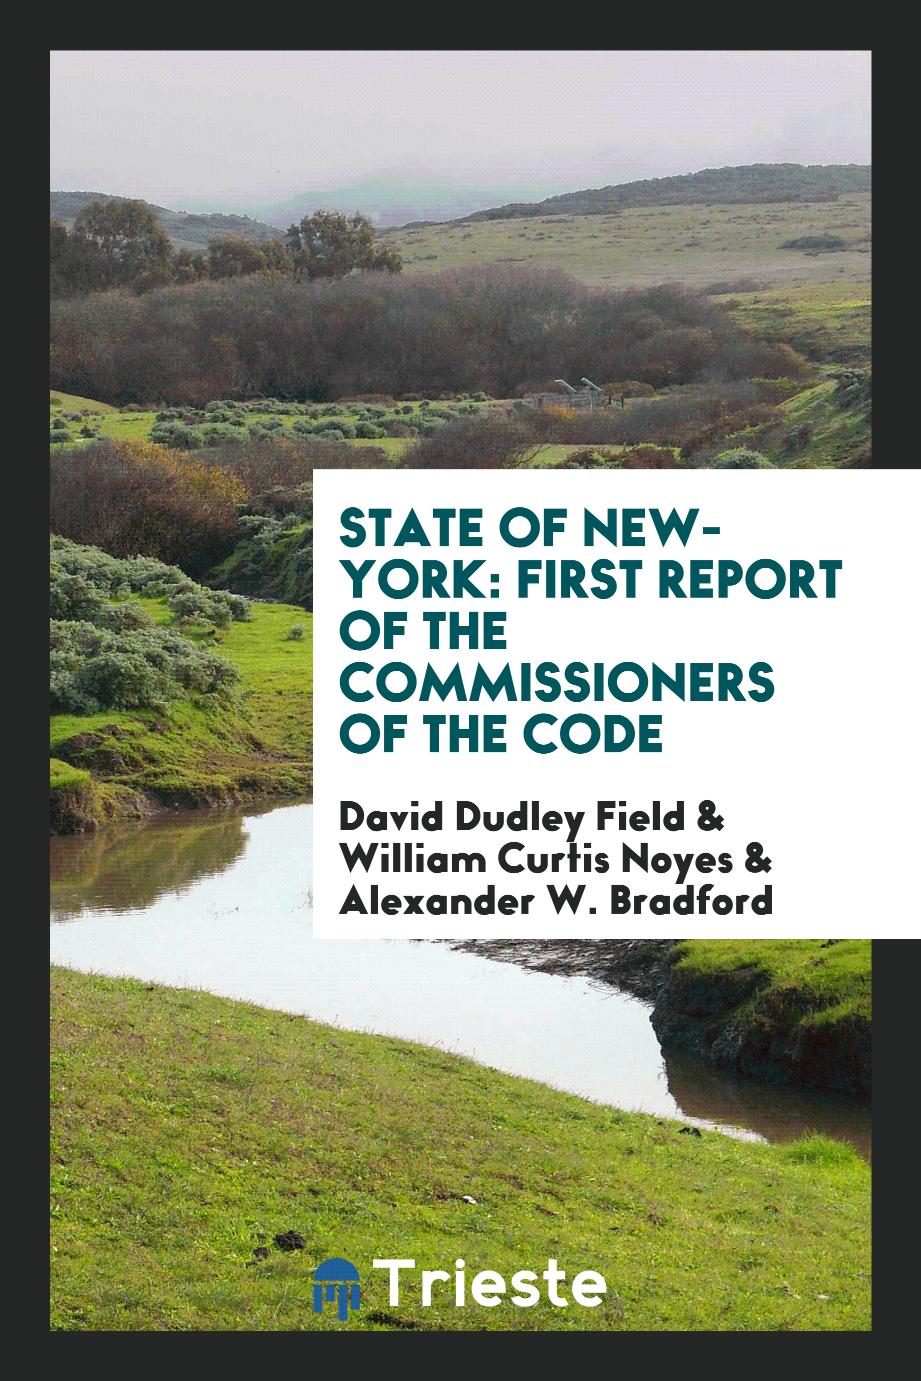 State of New-York: First Report of the Commissioners of the Code